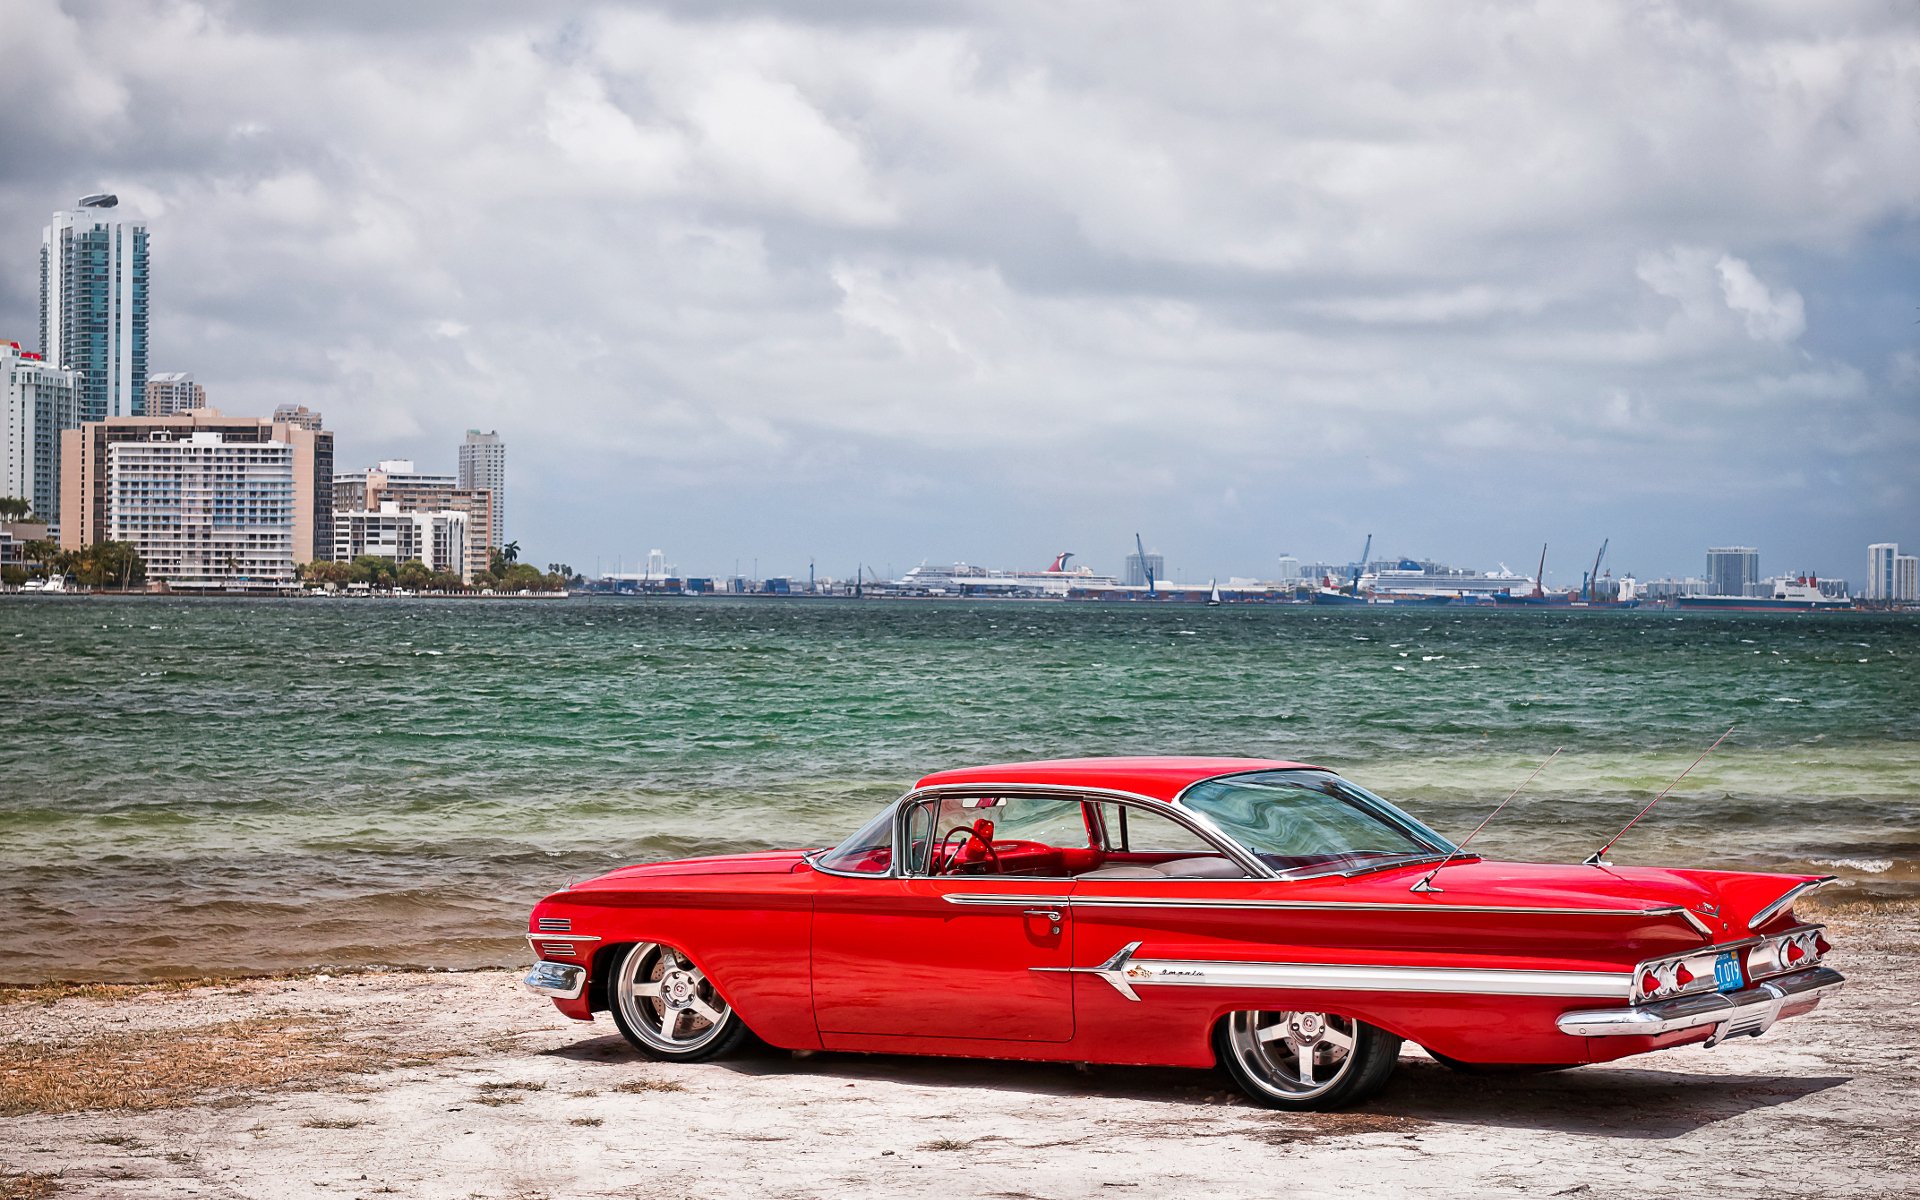 1960 chevy impala chevrolet car photo cars cars wallpapers auto wallpapers